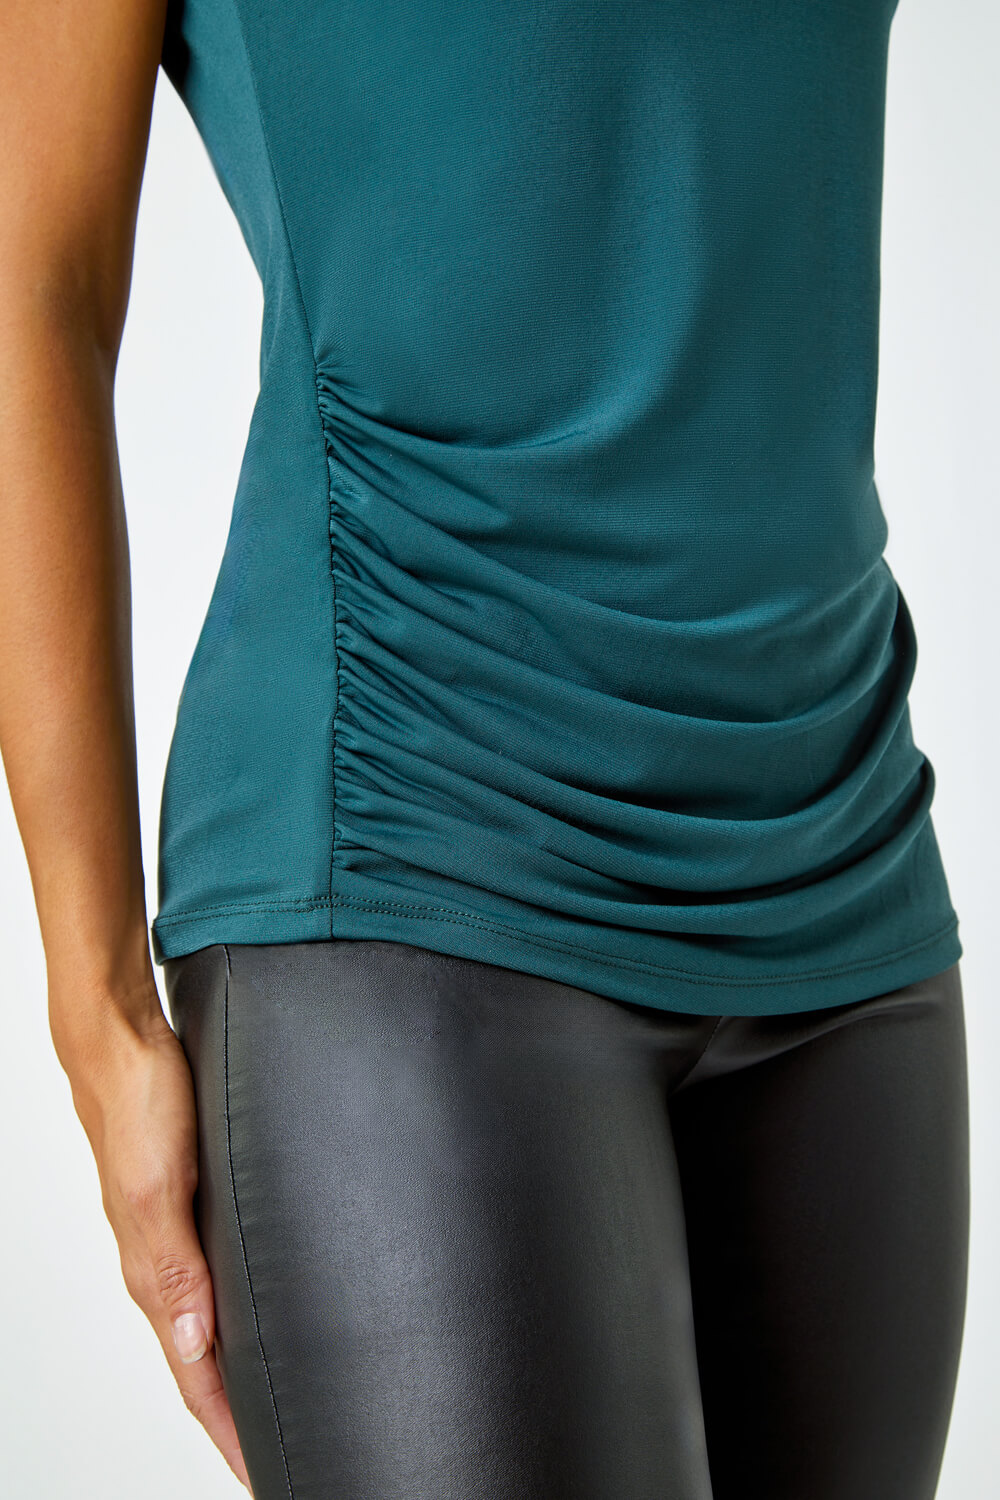 Forest  Sleeveless Ruched Stretch Top, Image 5 of 5